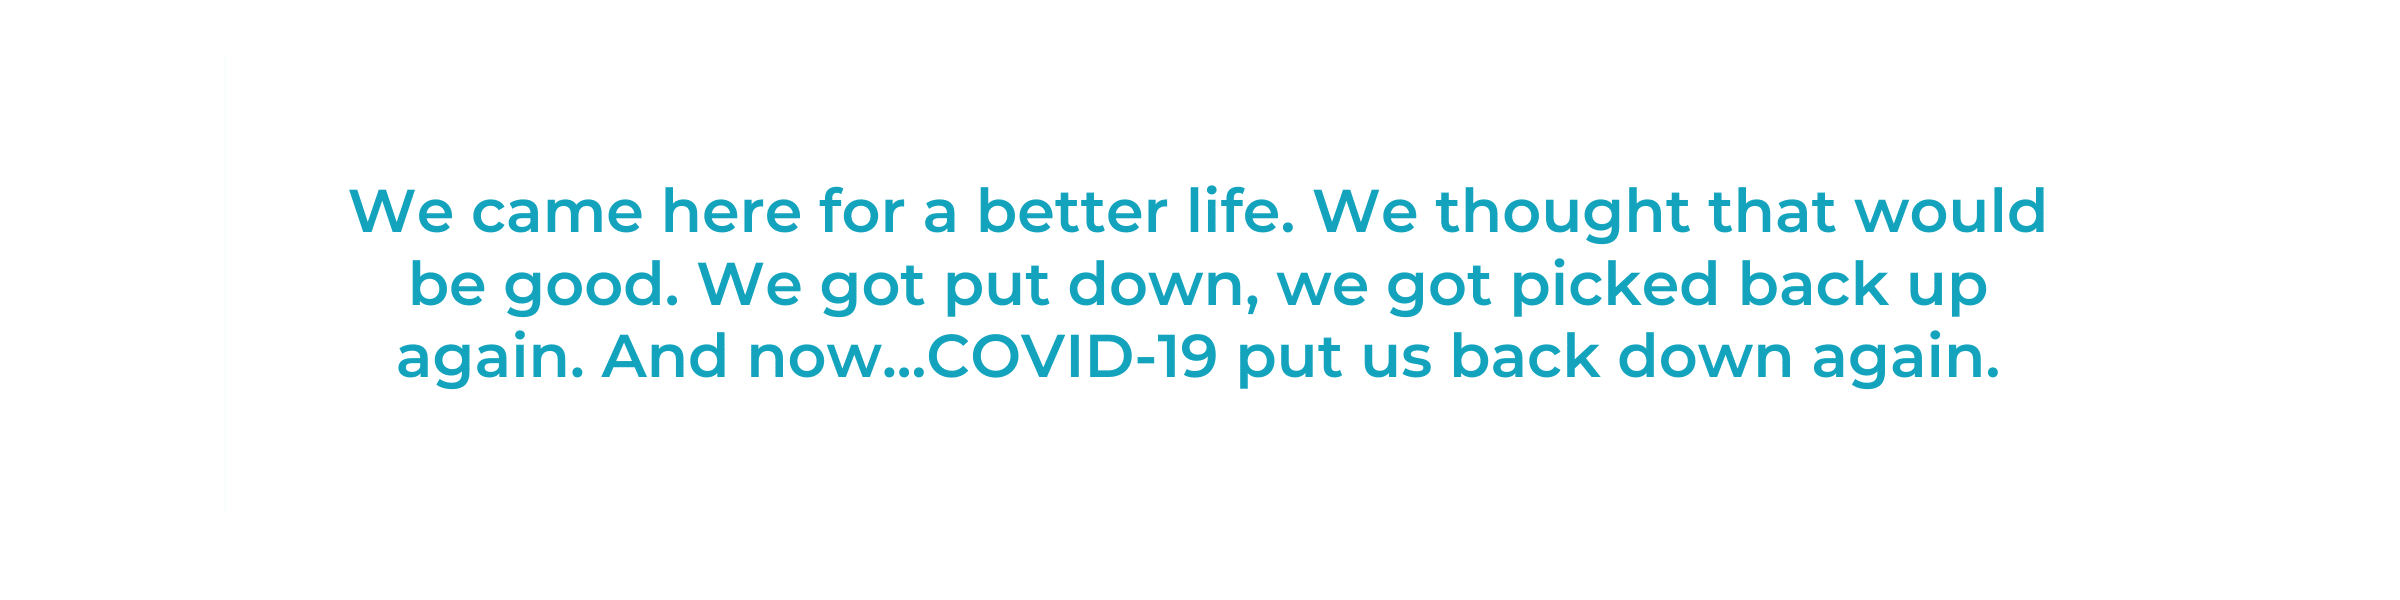 We came here for a better life. We thought that would be good. We got put down, we got picked back up again. And now...COVID-19 put us back down again.